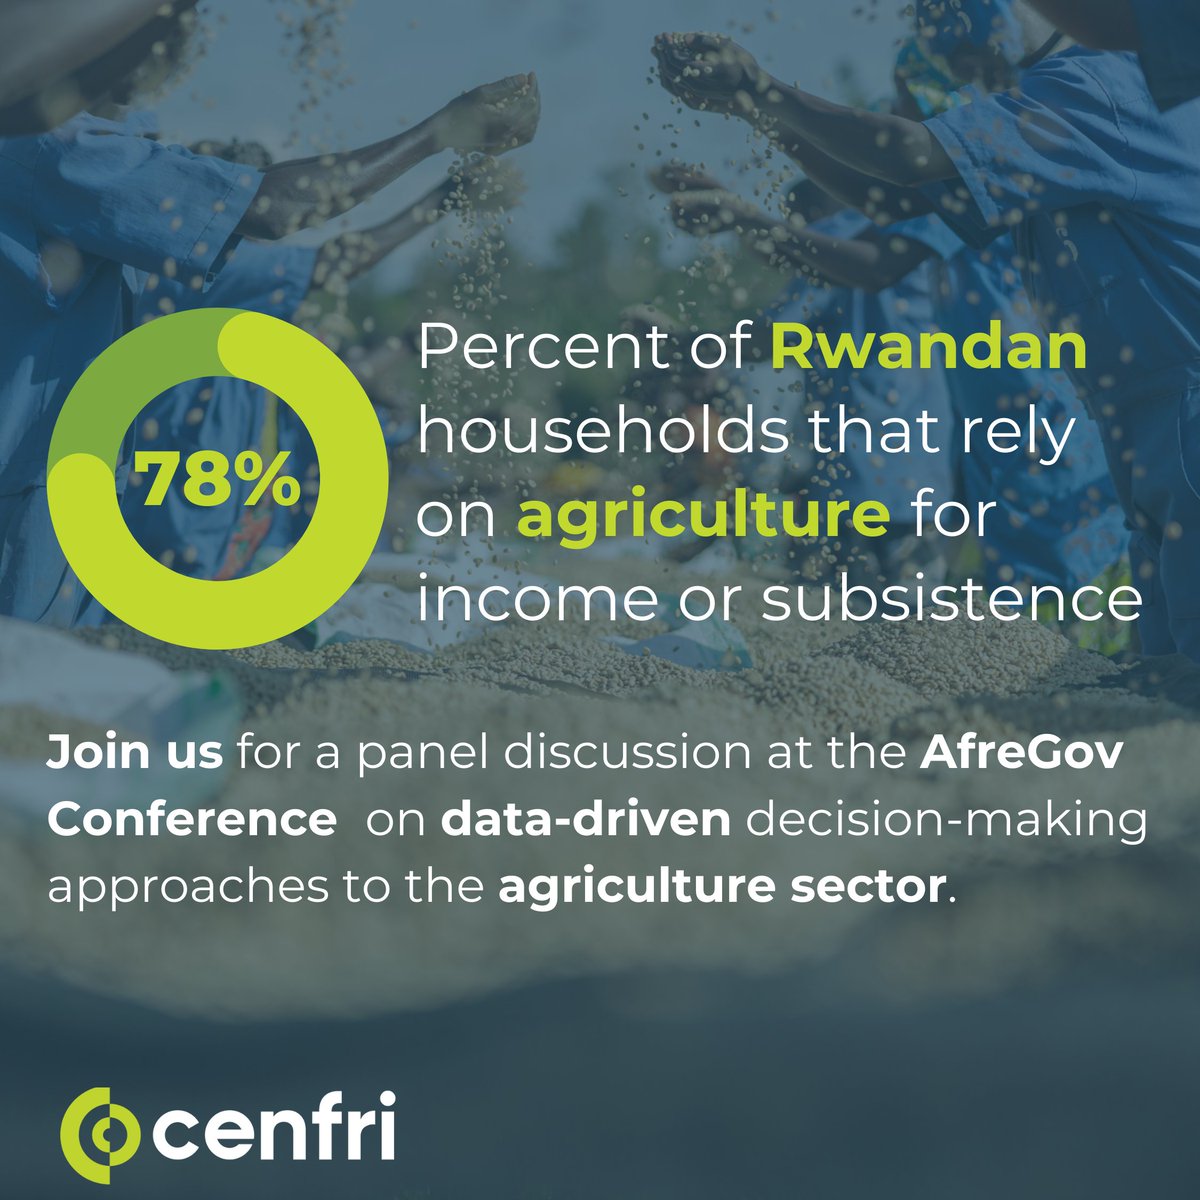 We are excited to be participating in the #Afregov conference, where we will be discussing using data to drive better policy outcomes to improve the agriculture sector. Register here: lnkd.in/dh_6xaka